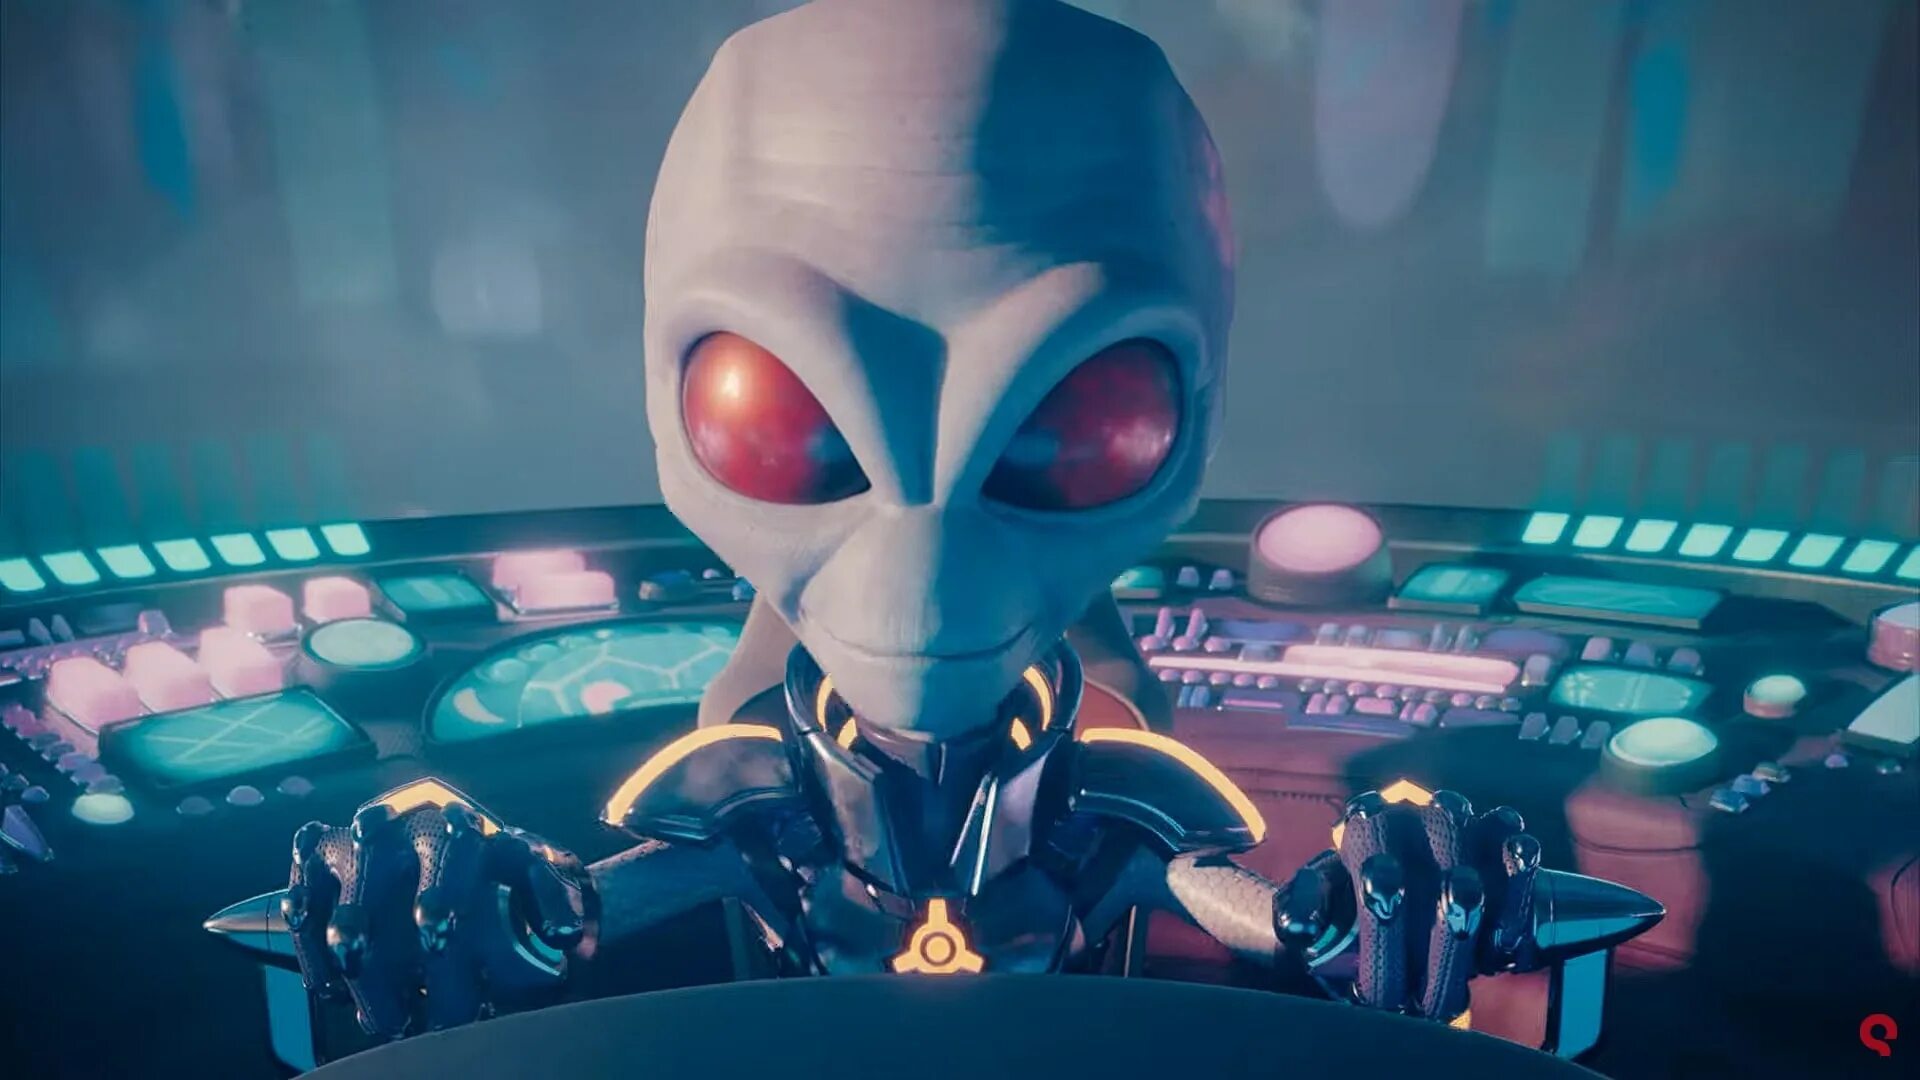 Destroy all Humans 2 reprobed. Destroy all Humans 2 reprobed 2022. Destroy all Humans! (2020). Destroy all Humans обои 1920 1080. Destroy all humans reprobed